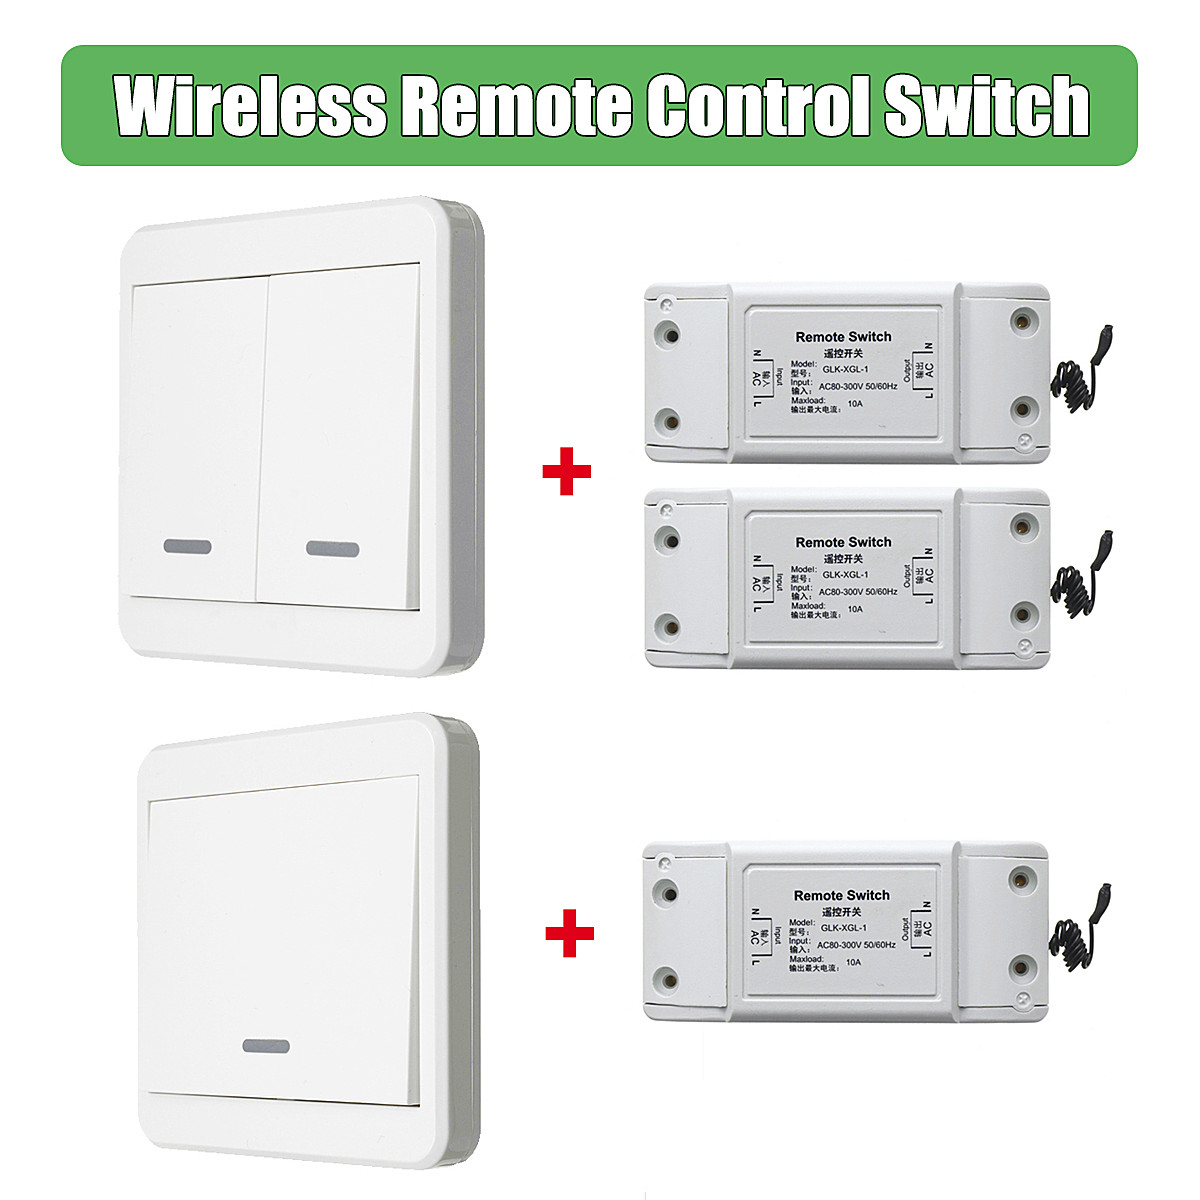 12Way-Lamp-Light-Wireless-Remote-Control-Switch-Receiver-Transmitter-ONOFF-Switch-Controller-1304488-2